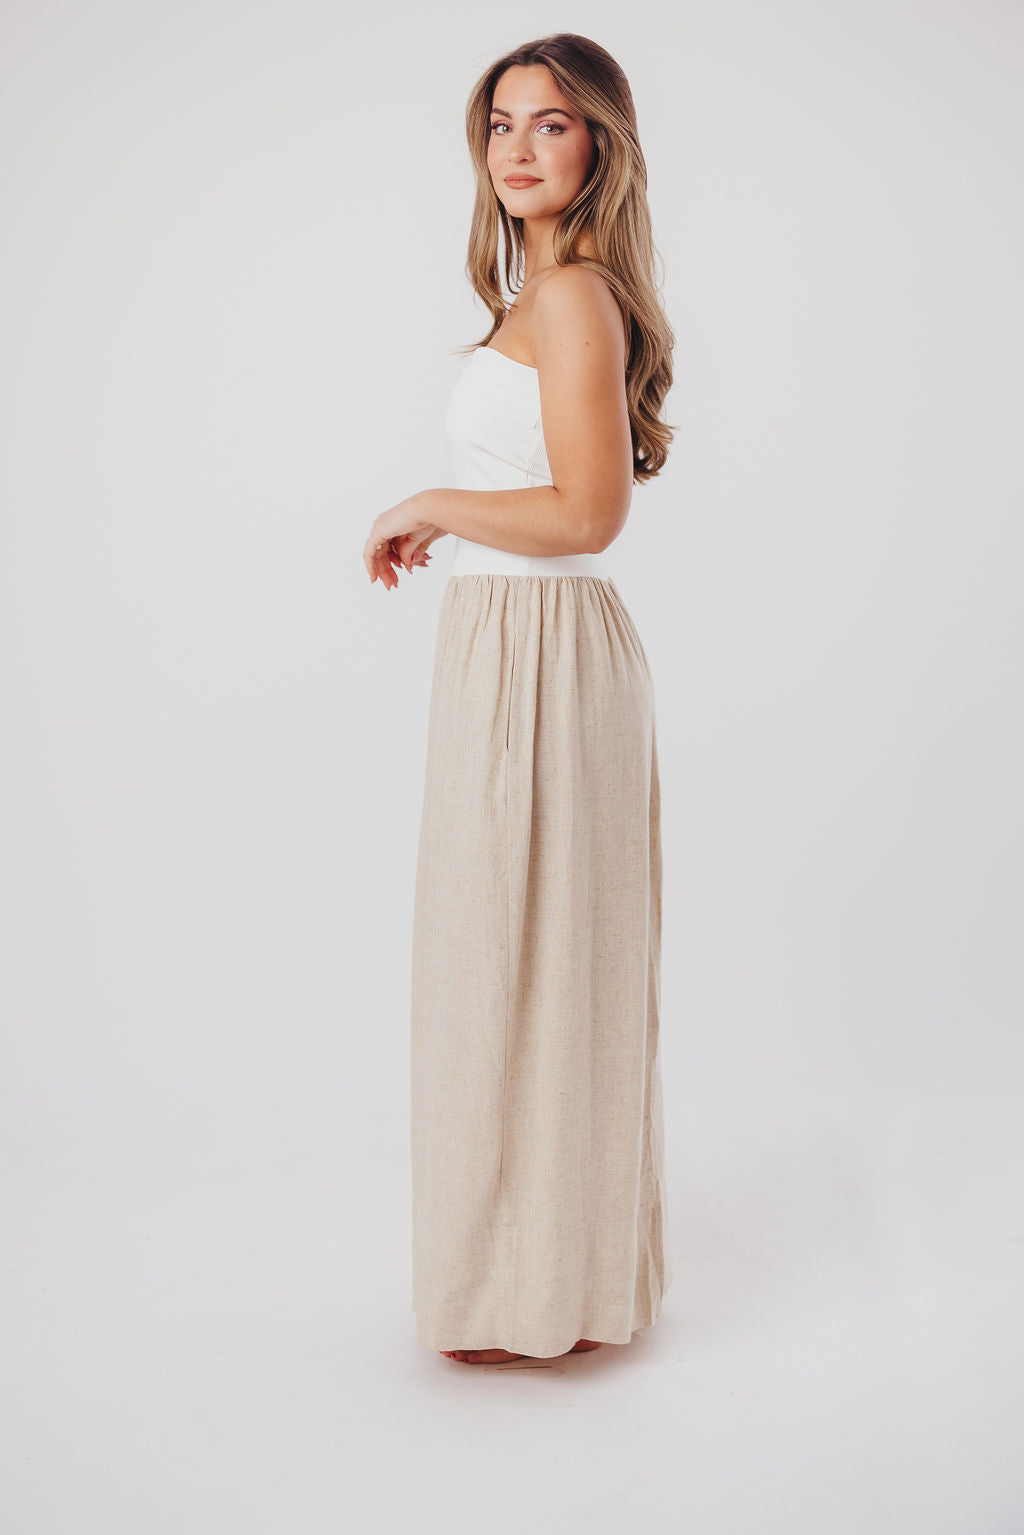 Kaylee Linen and Ribbed Knit Maxi Dress in White/Oatmeal